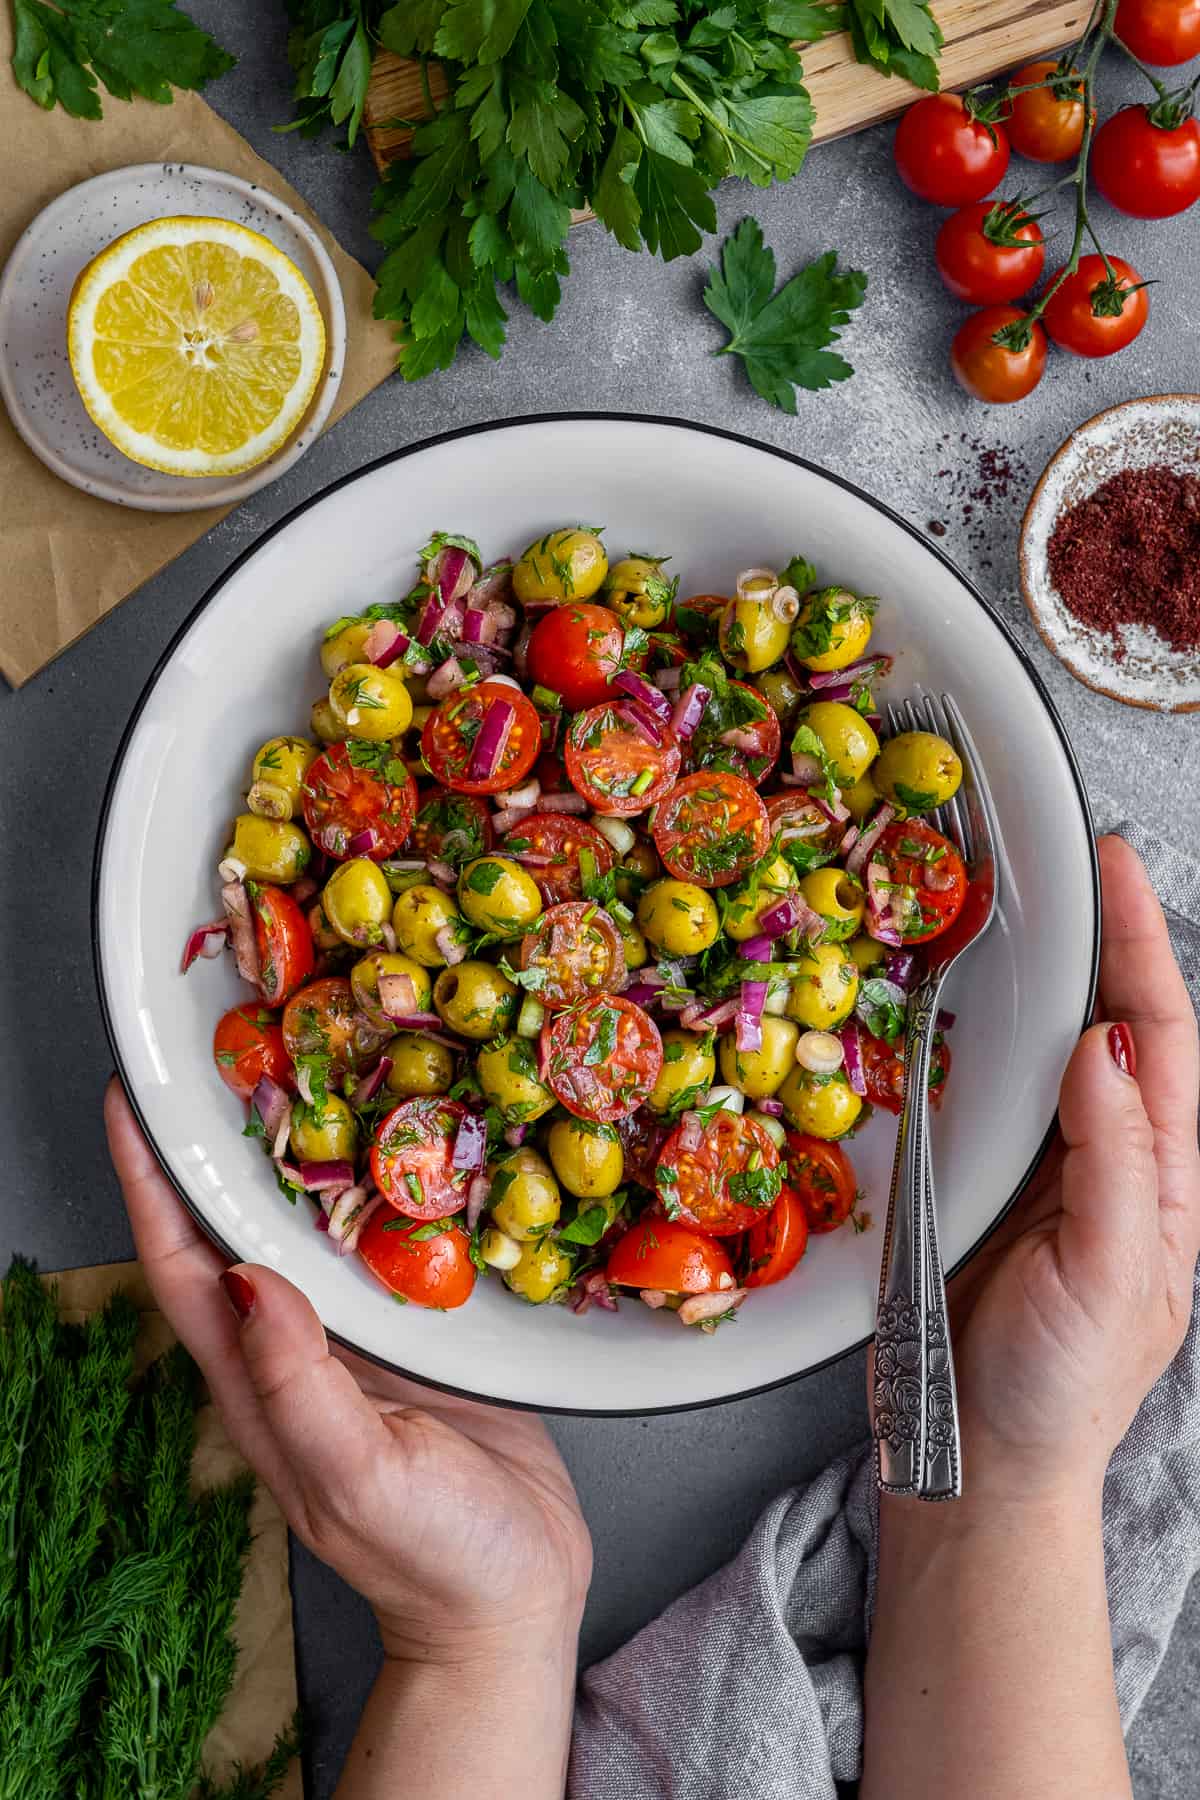 Hands holding green olive salad with tomatoes in a white bowl.